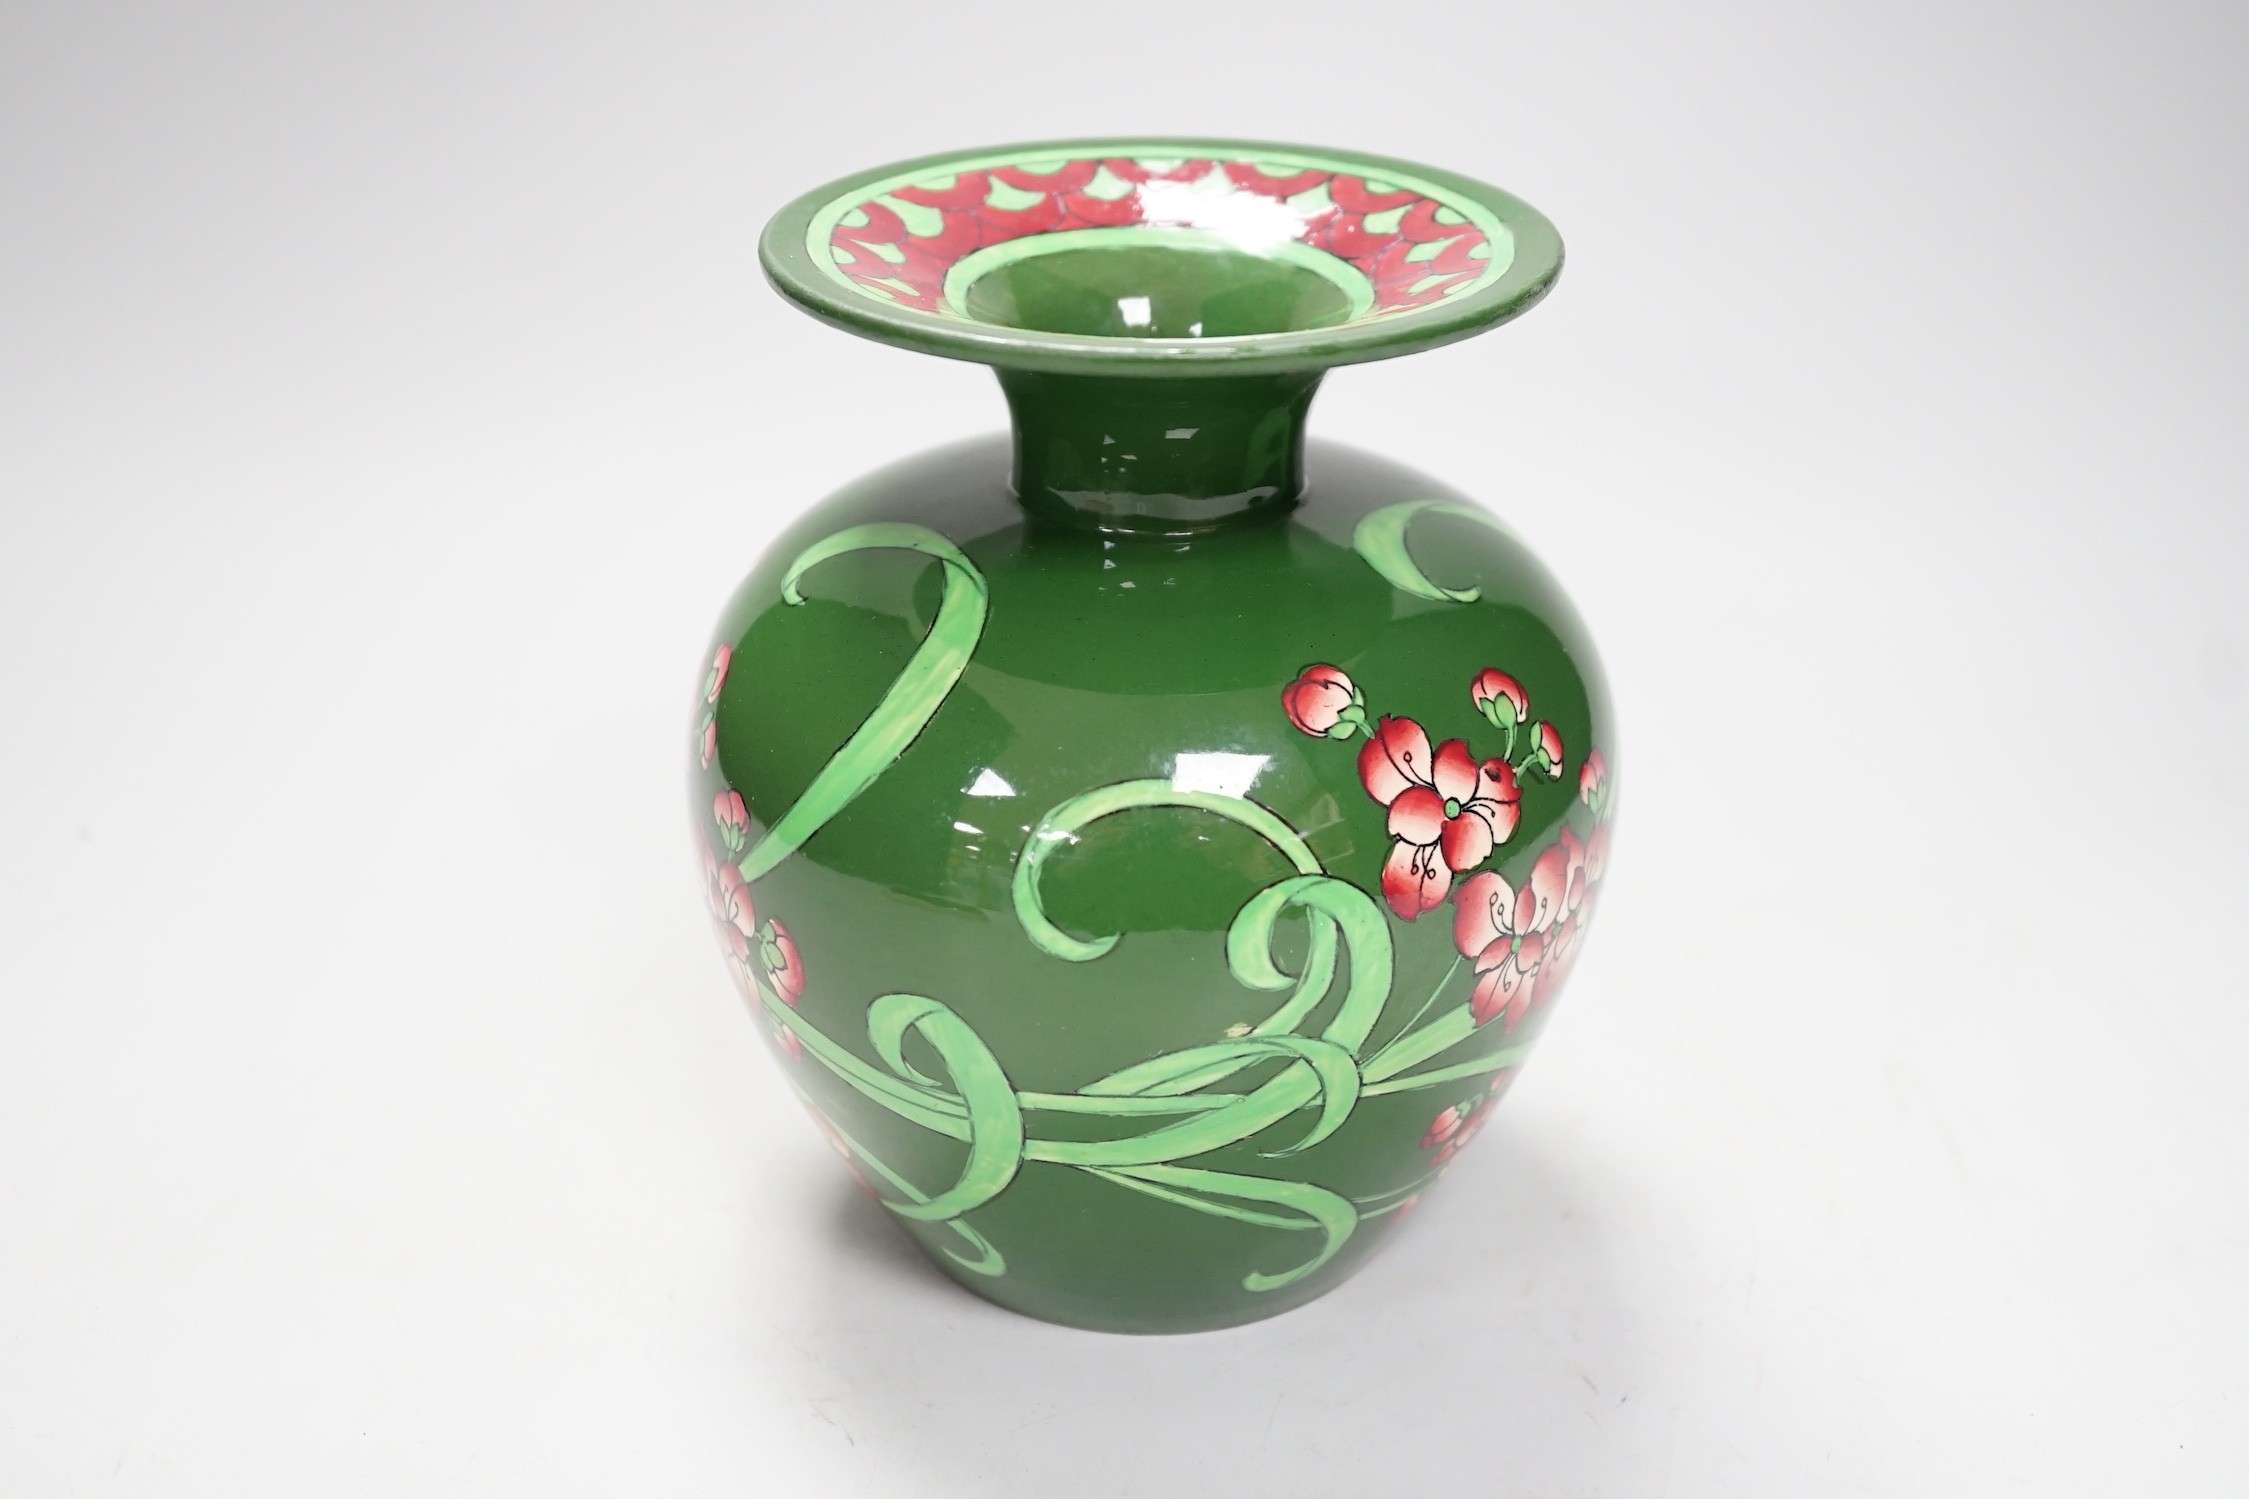 The Foley “Intarsio” hand painted floral vase, numbered 3442, 15cm tall - Image 3 of 6